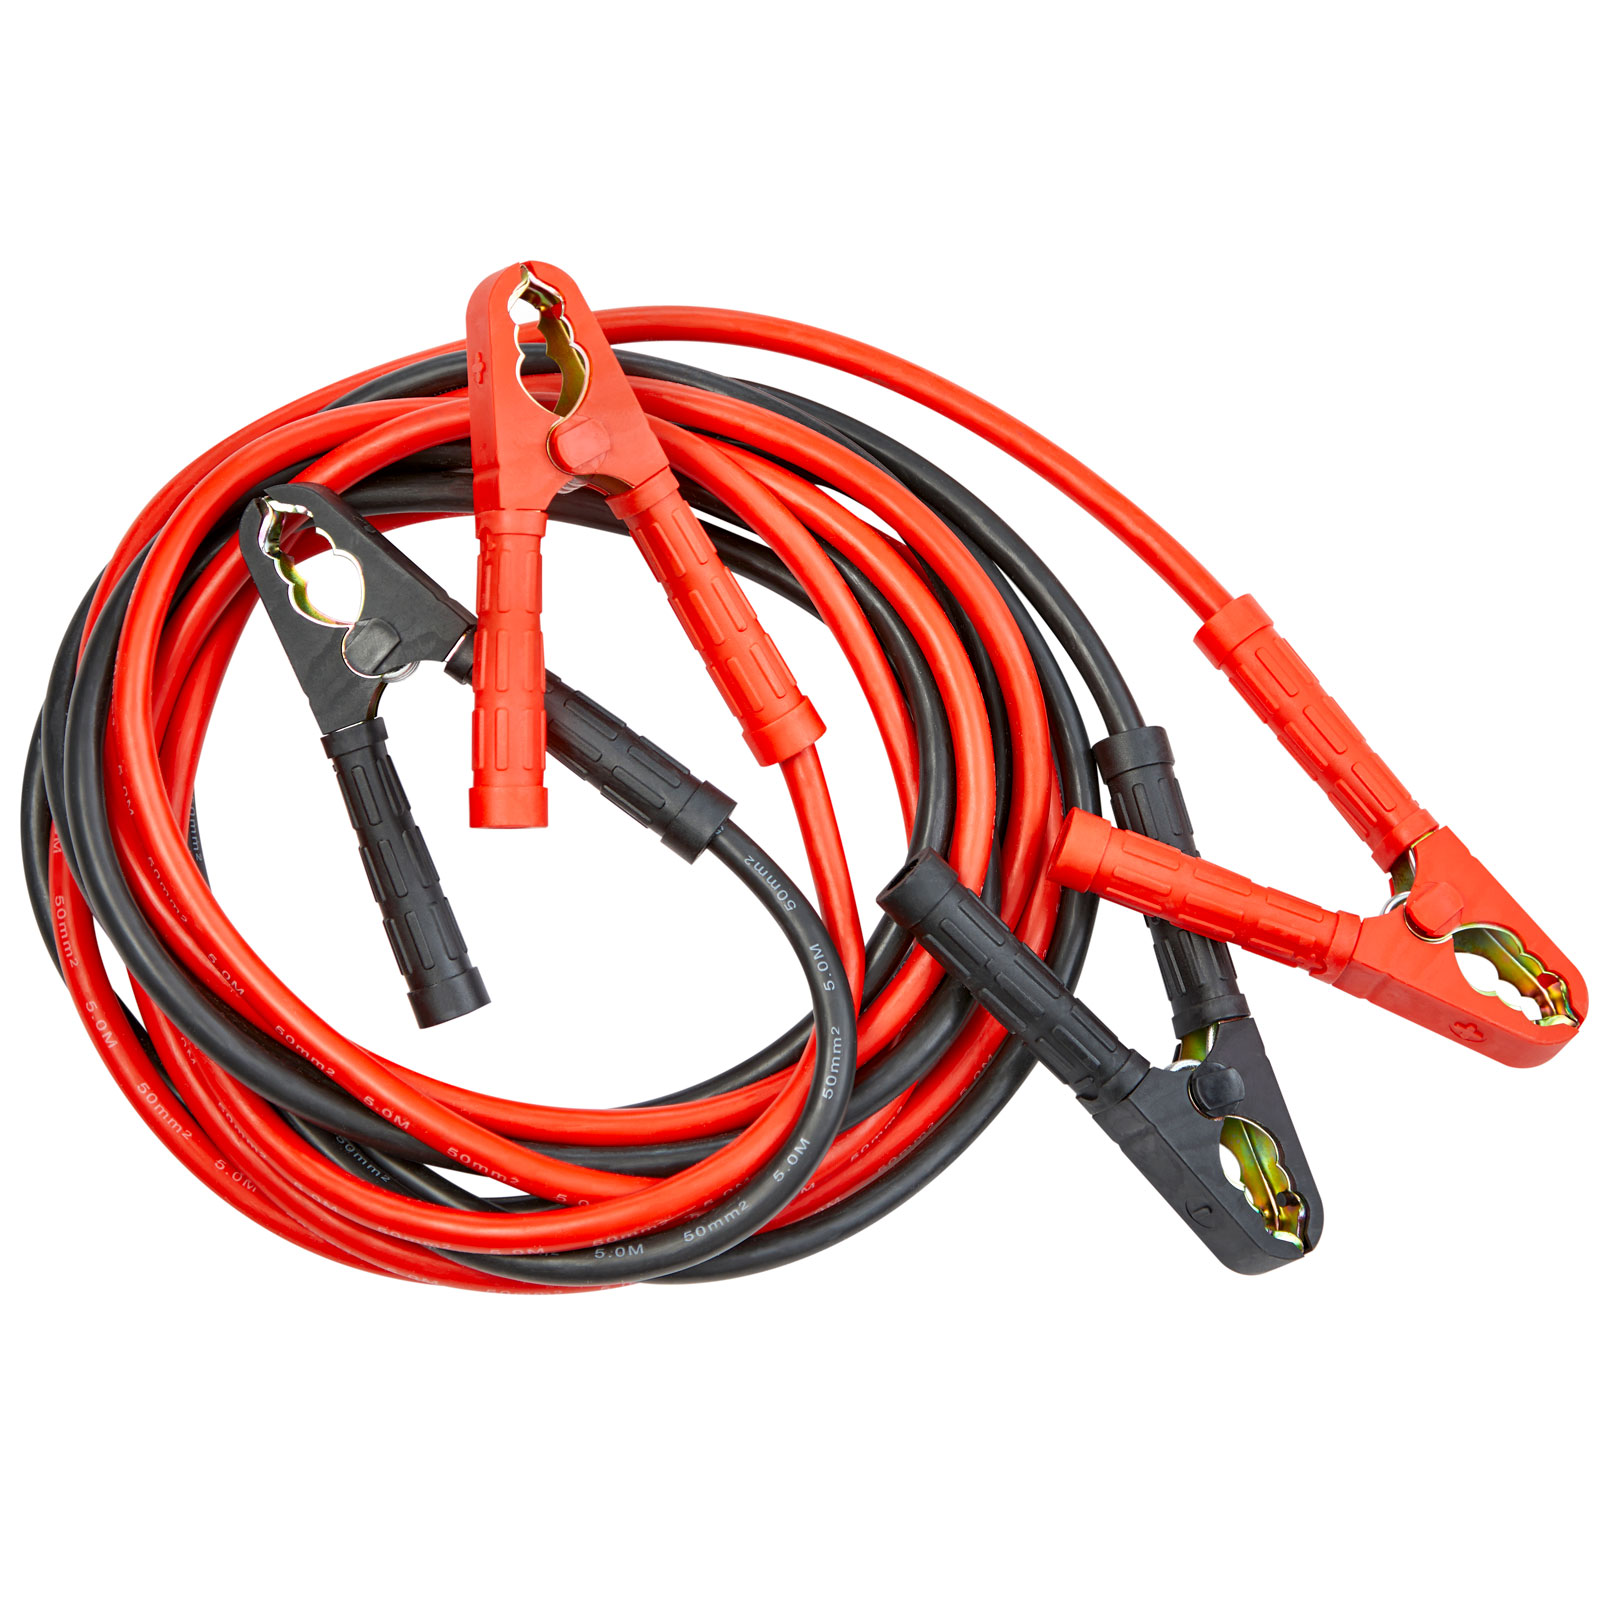 Booster Cables - 600A, RBC500